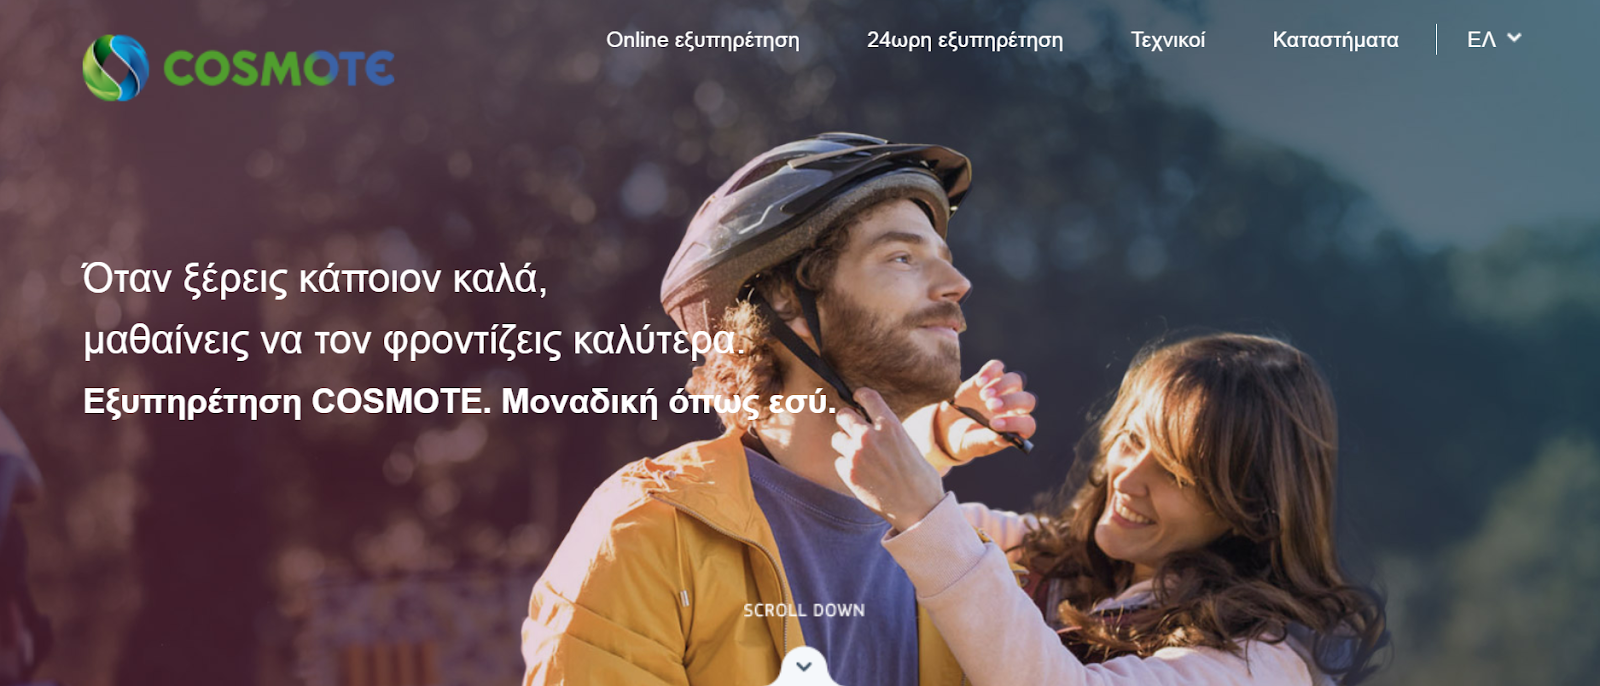 Cosmote website snapshot highlighting the services it offers.